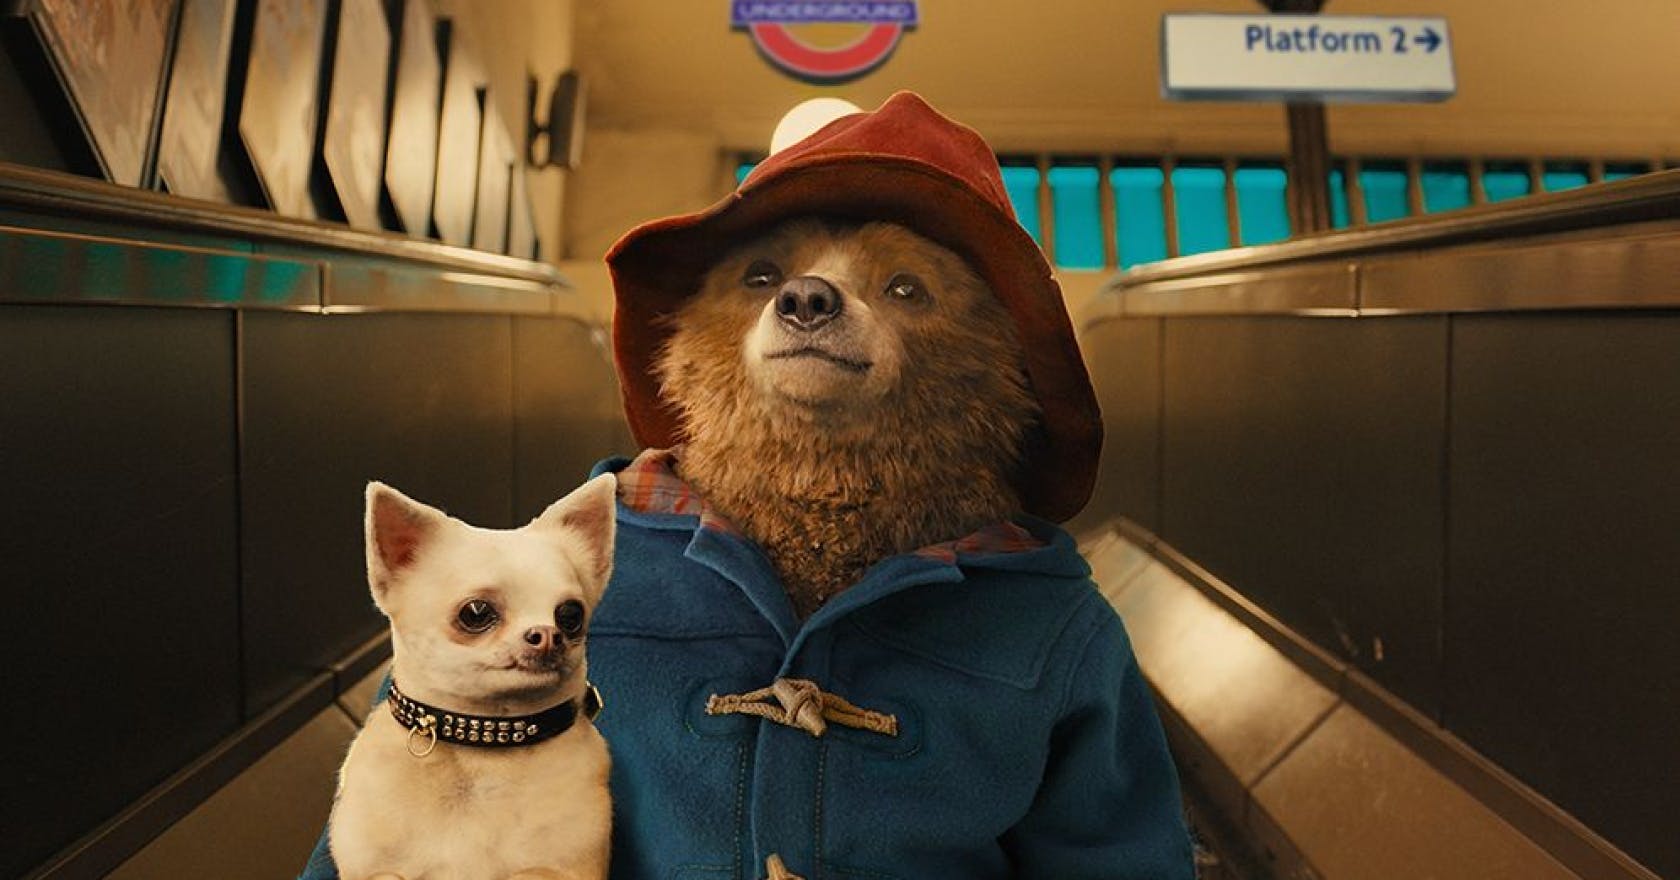 Paddington 3 is officially in the works, so grab your marmalade